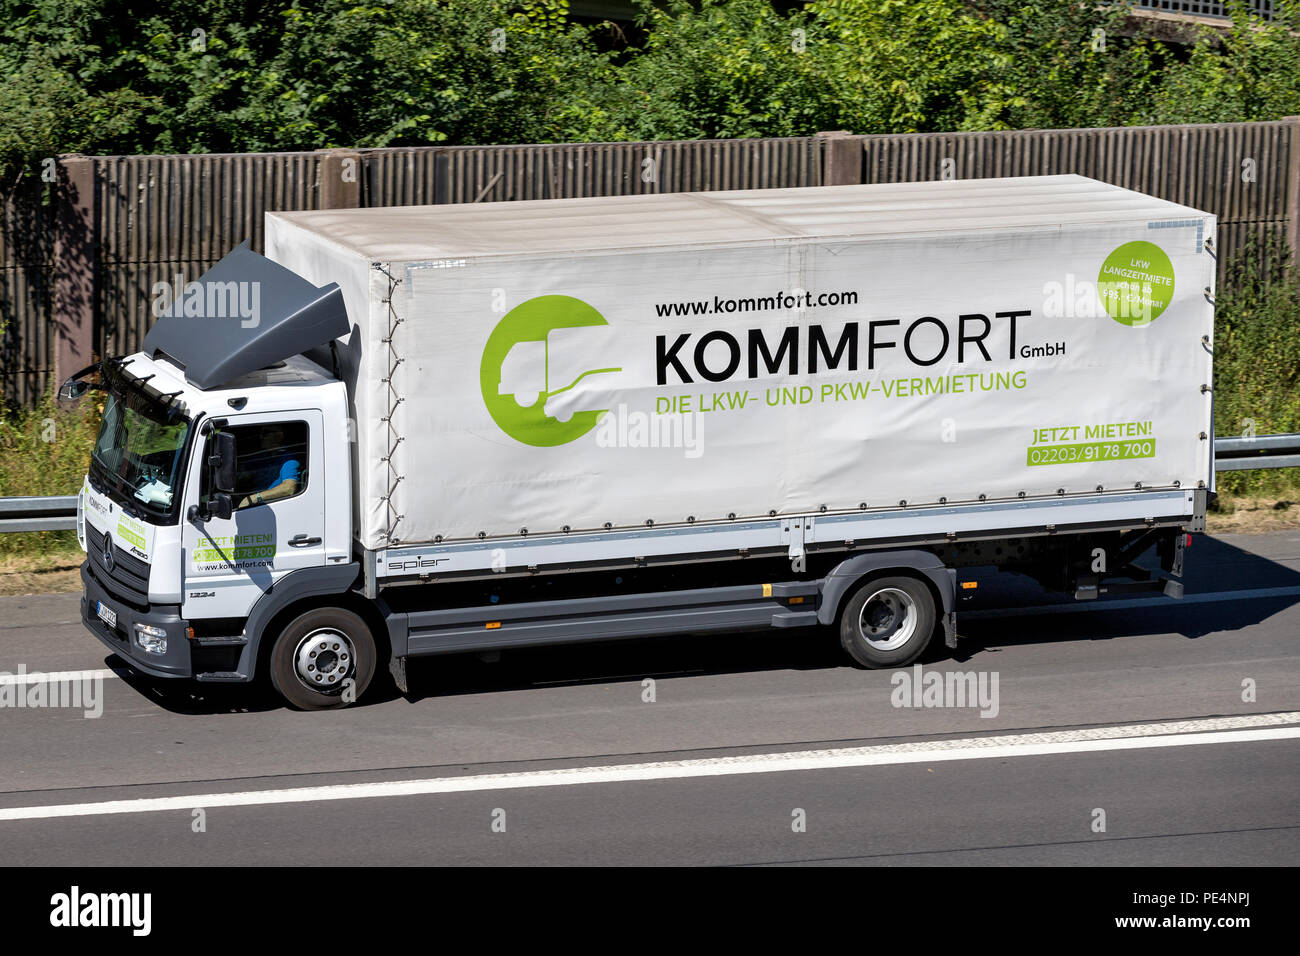 Mercedes-Benz Atego of KommFort on motorway. KommFort is a German truck rental and service company, with headquarters in Cologne. Stock Photo